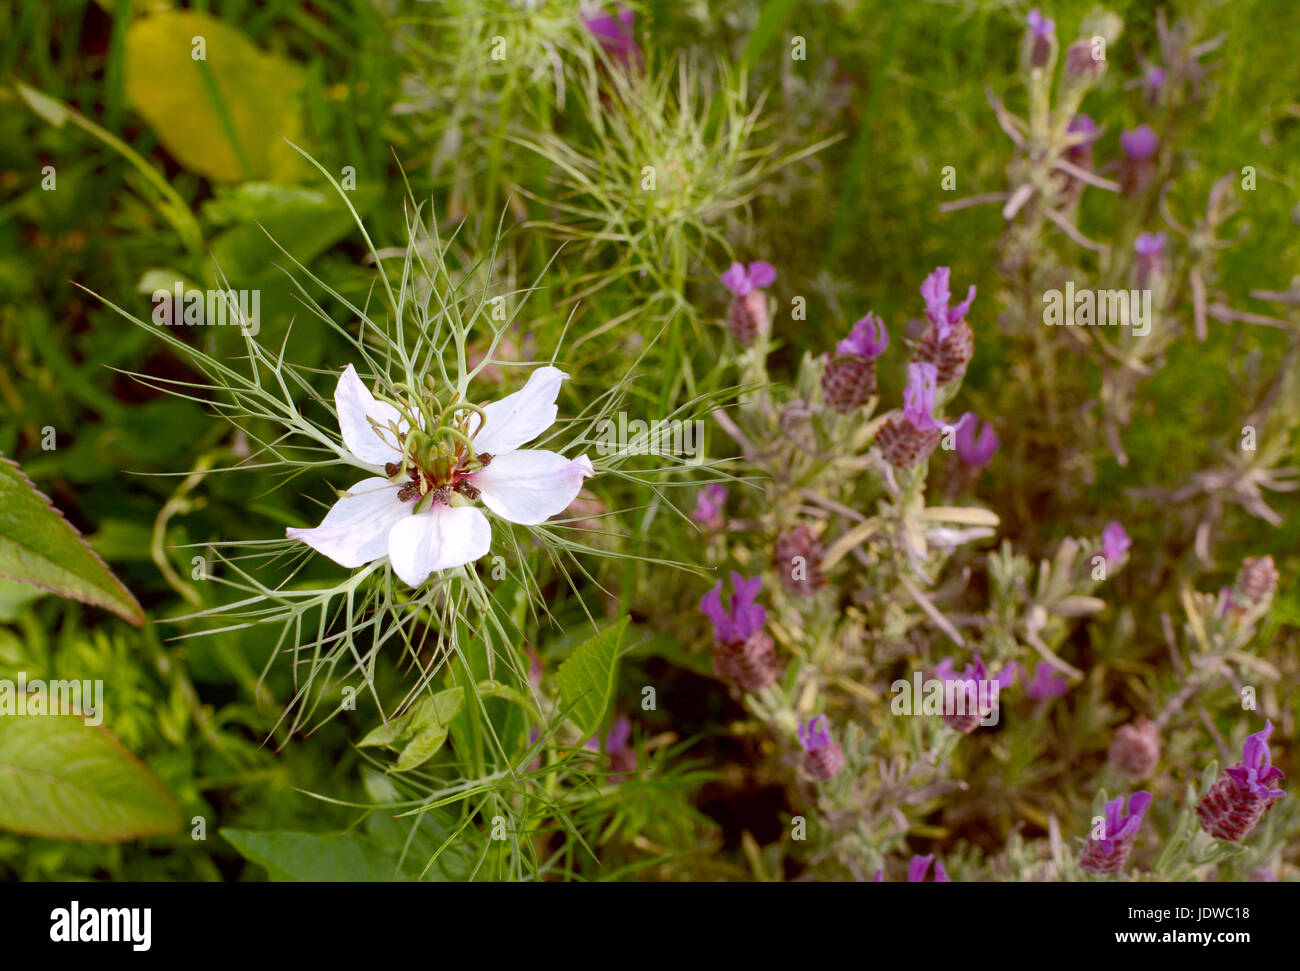 White love-in-a-mist flower with frondy foliage grows next to butterfly lavender in a garden Stock Photo